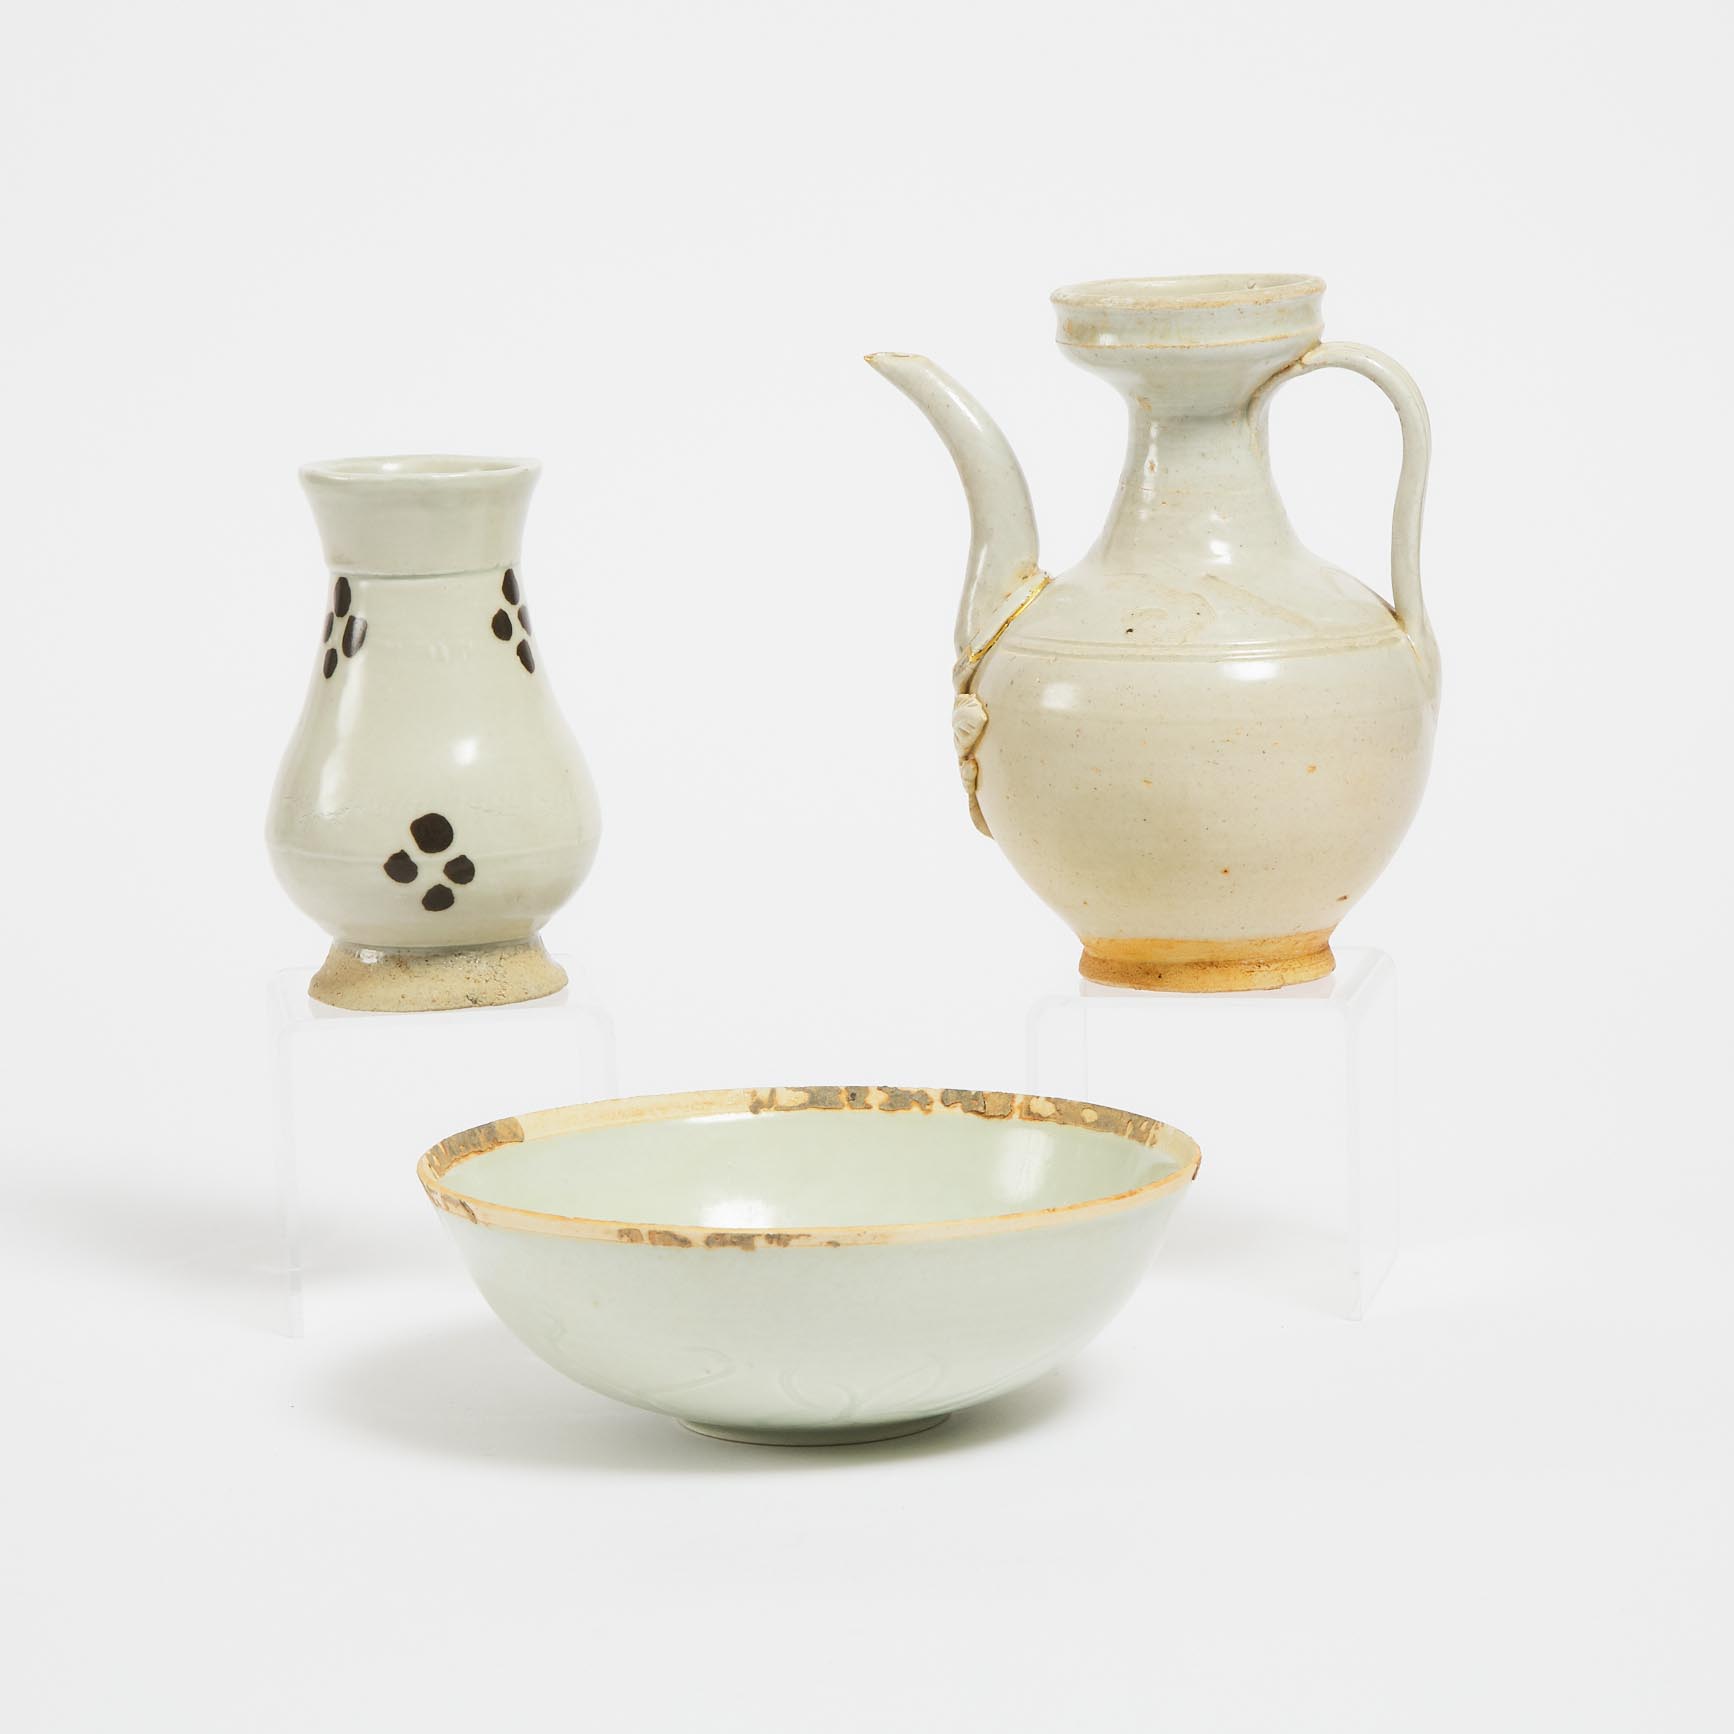 A Group of Three Qingbai-Glazed Ceramics, Song Dynasty or Later